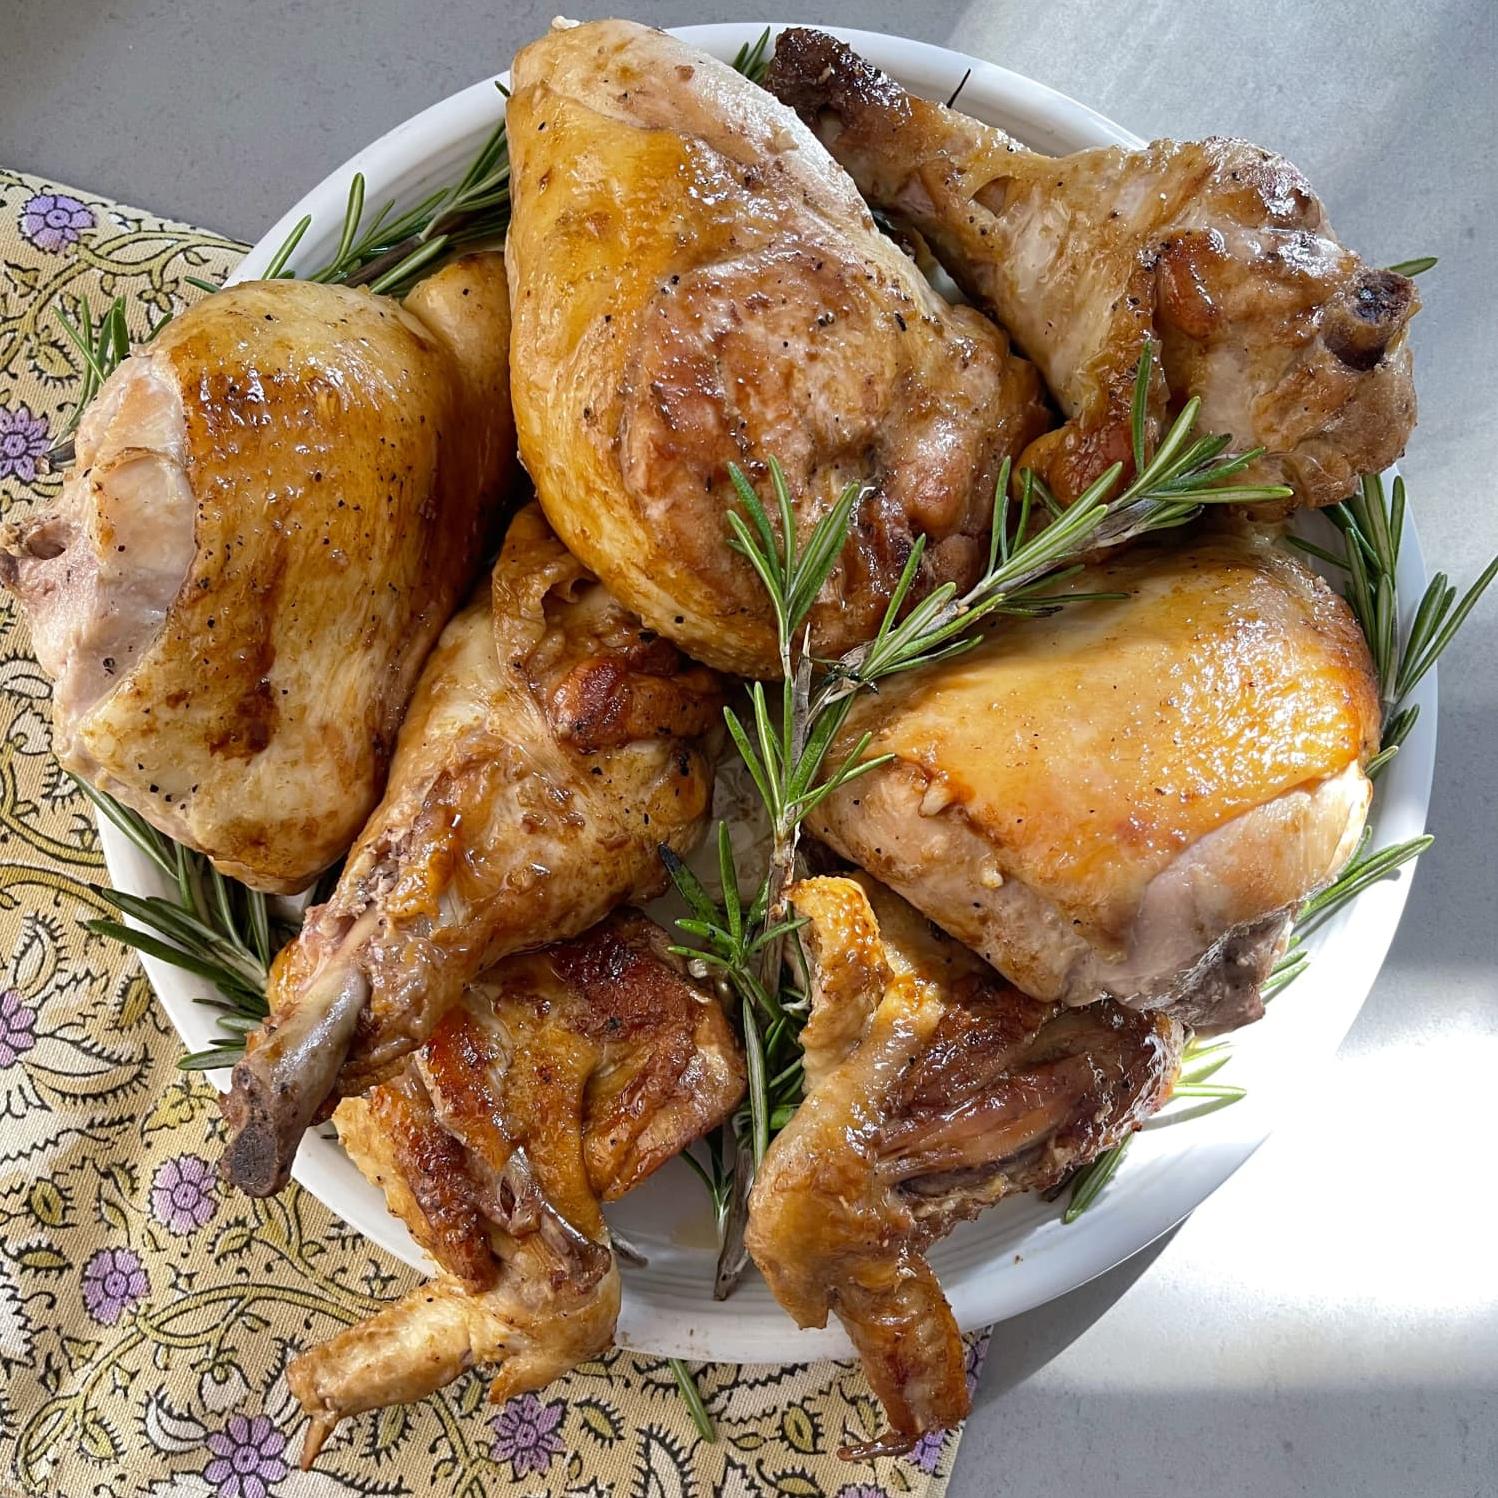  The perfect pairing of succulent chicken and fragrant herbs of rosemary fills your senses with mouthwatering aromas.